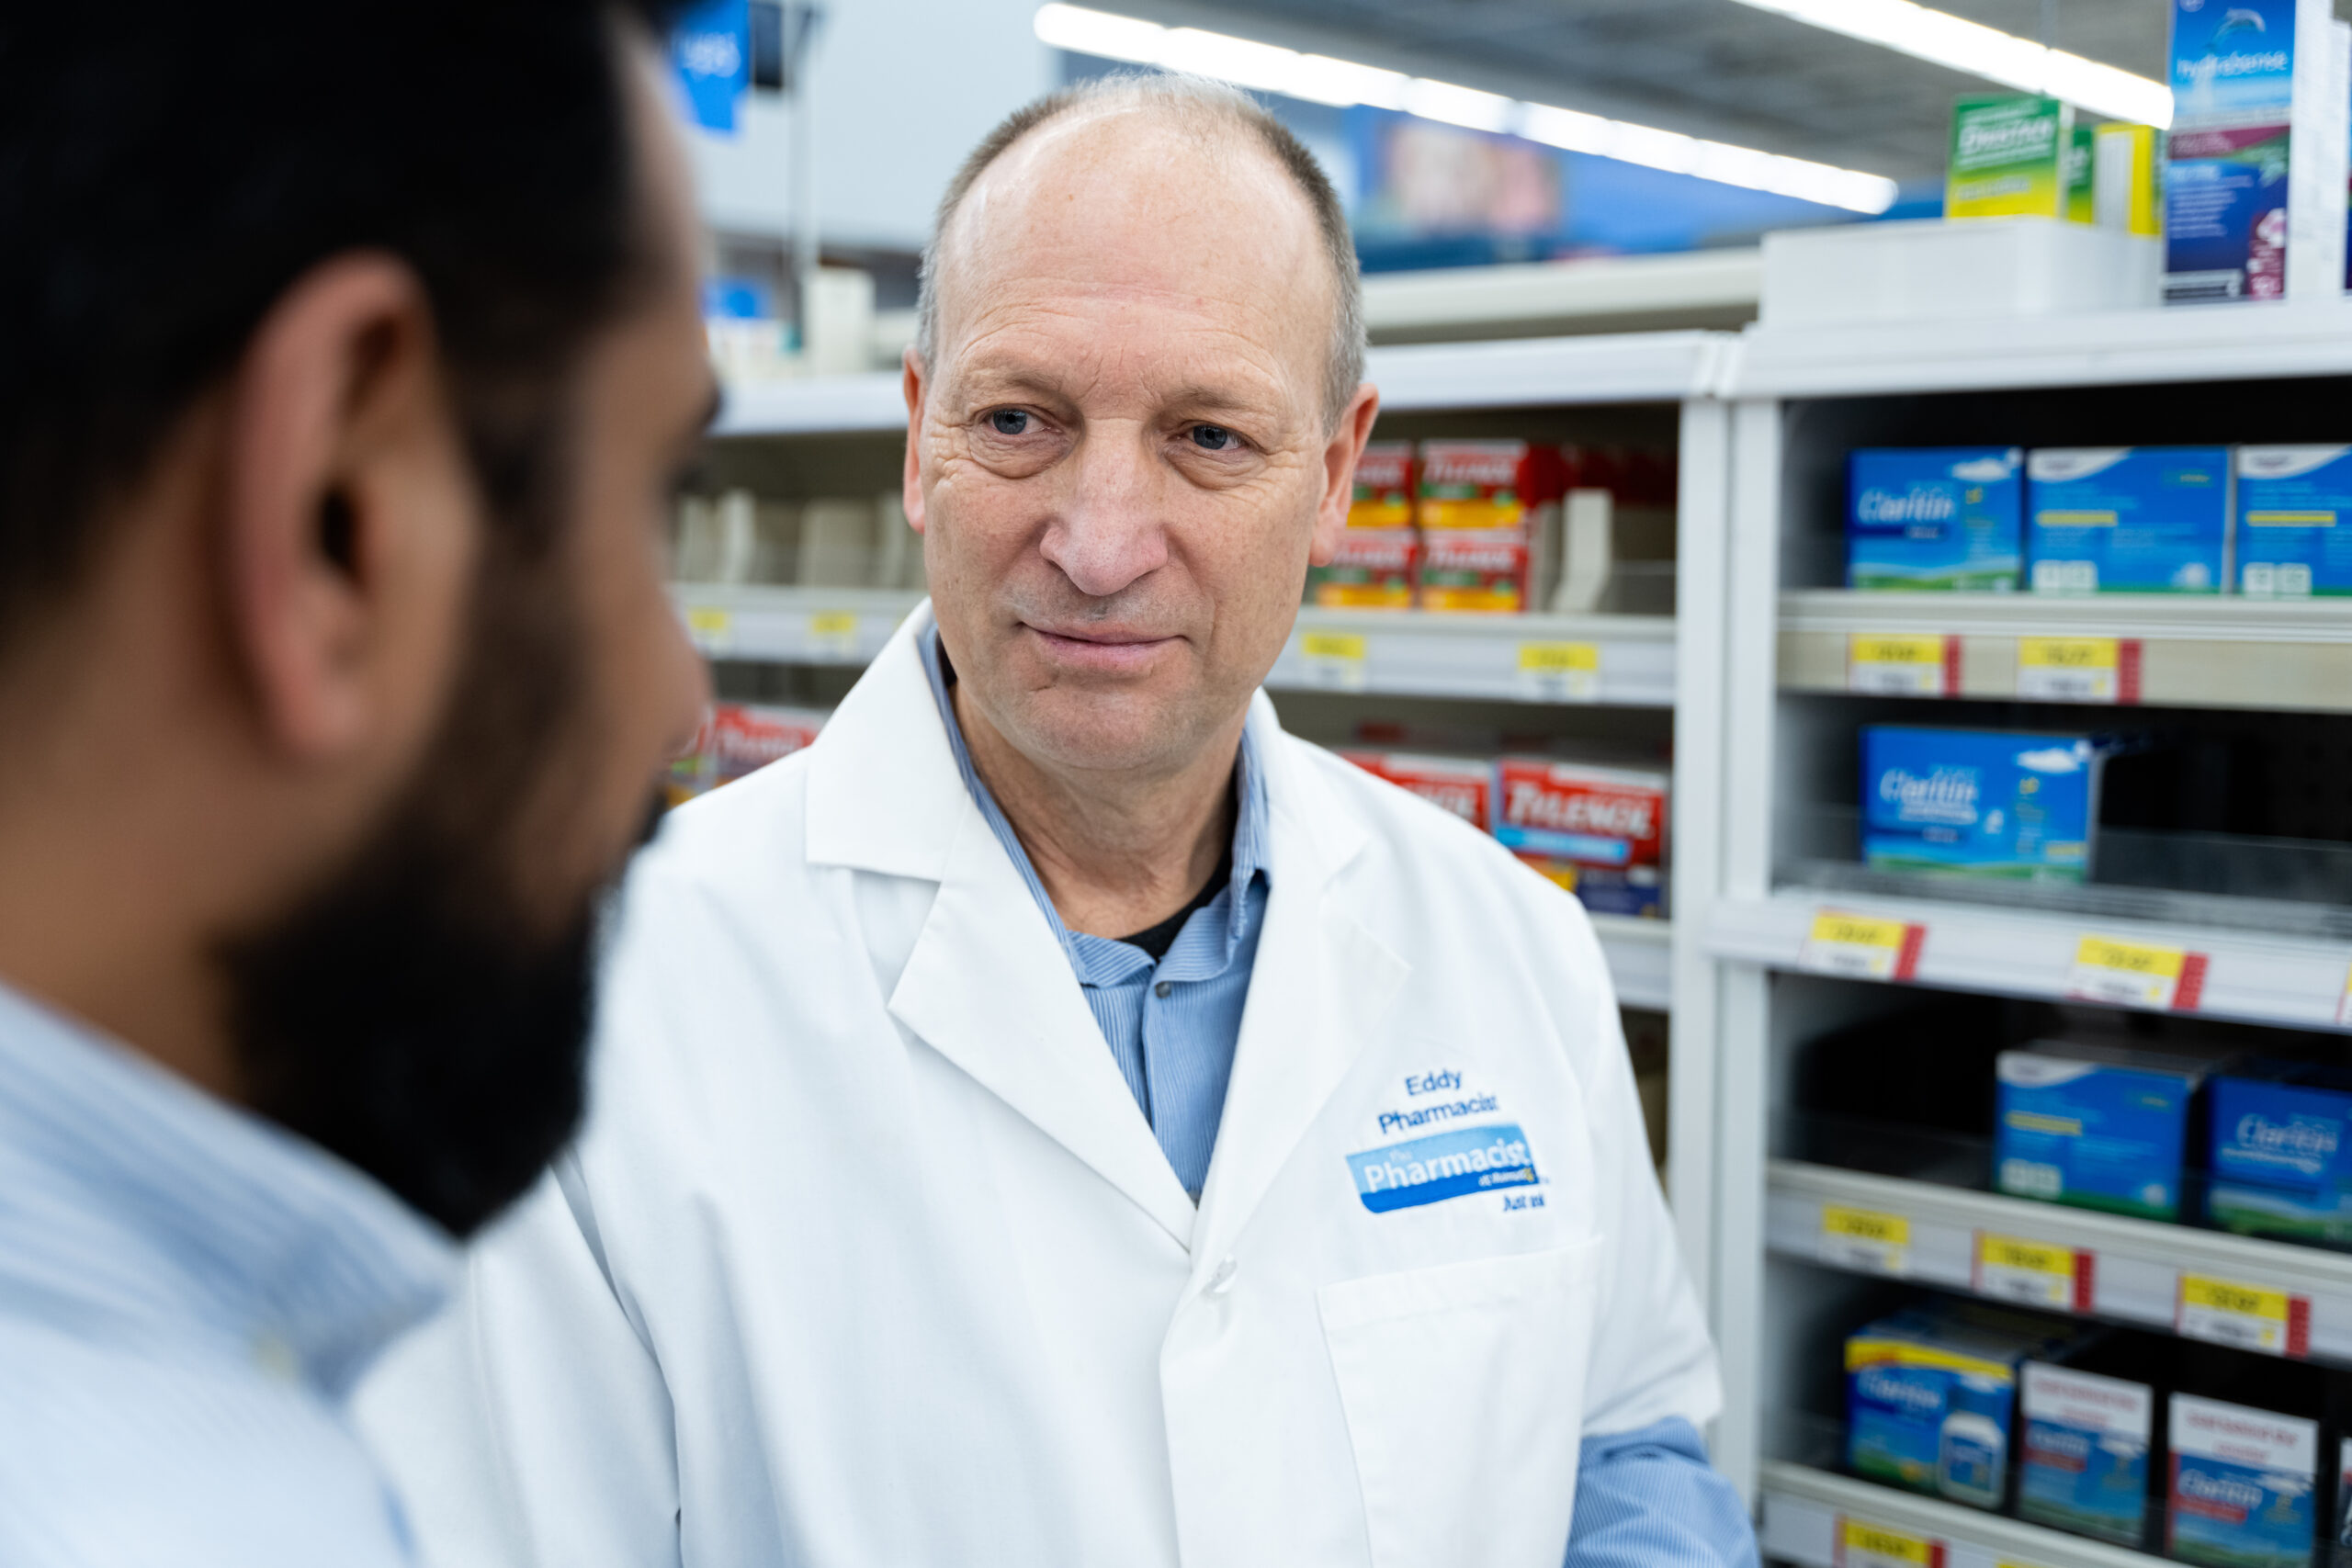 Ed Lebler speaks with a patient at his pharmacy.